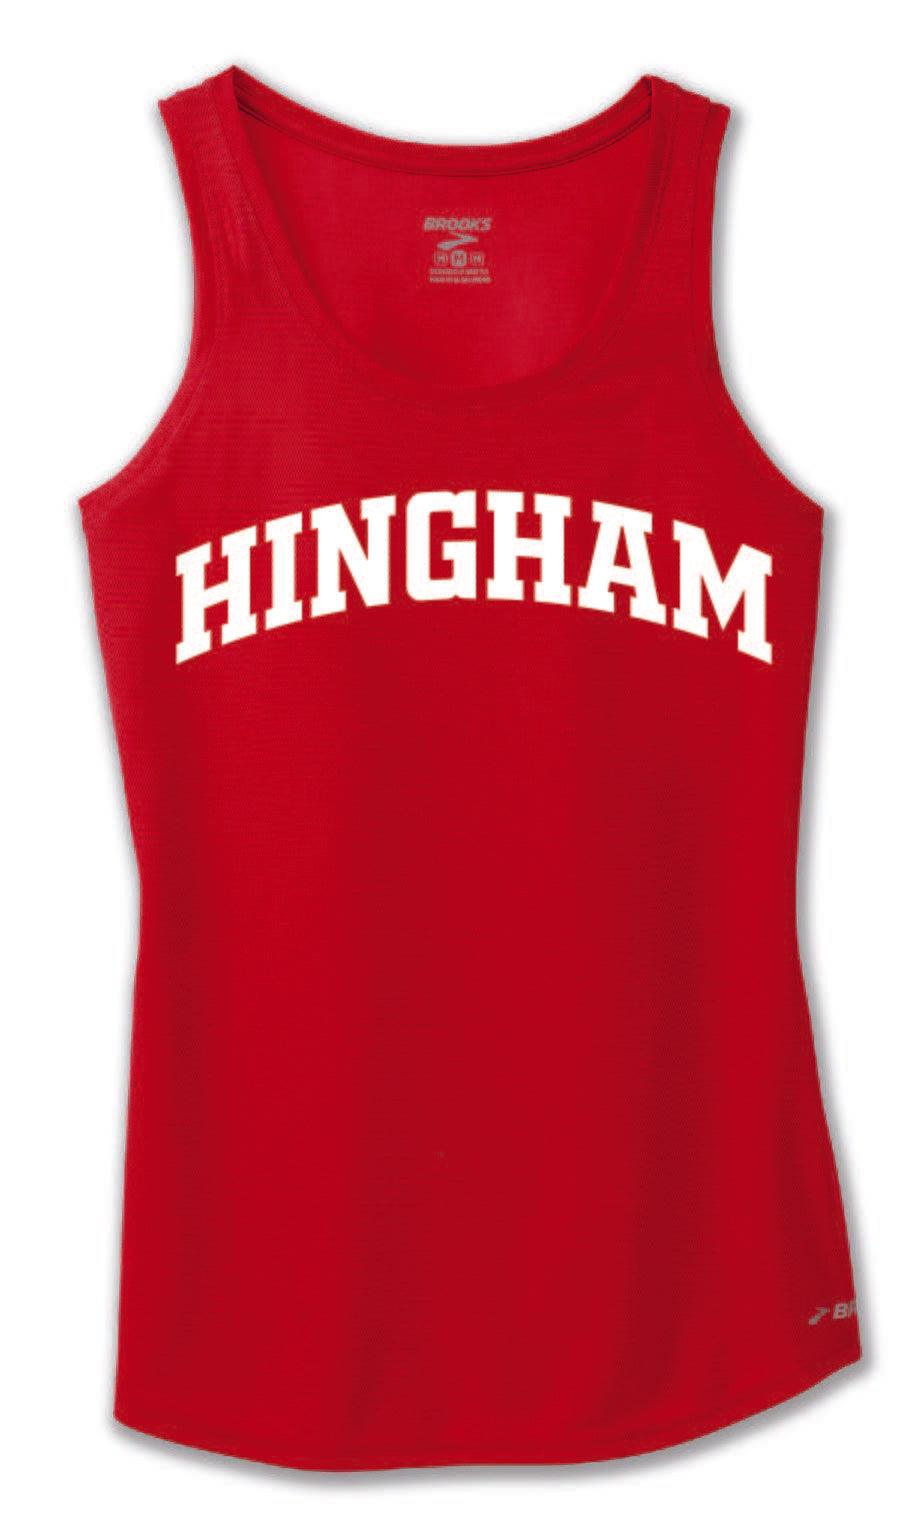 Hingham Track and Field Womens Team Singlets (LST356)